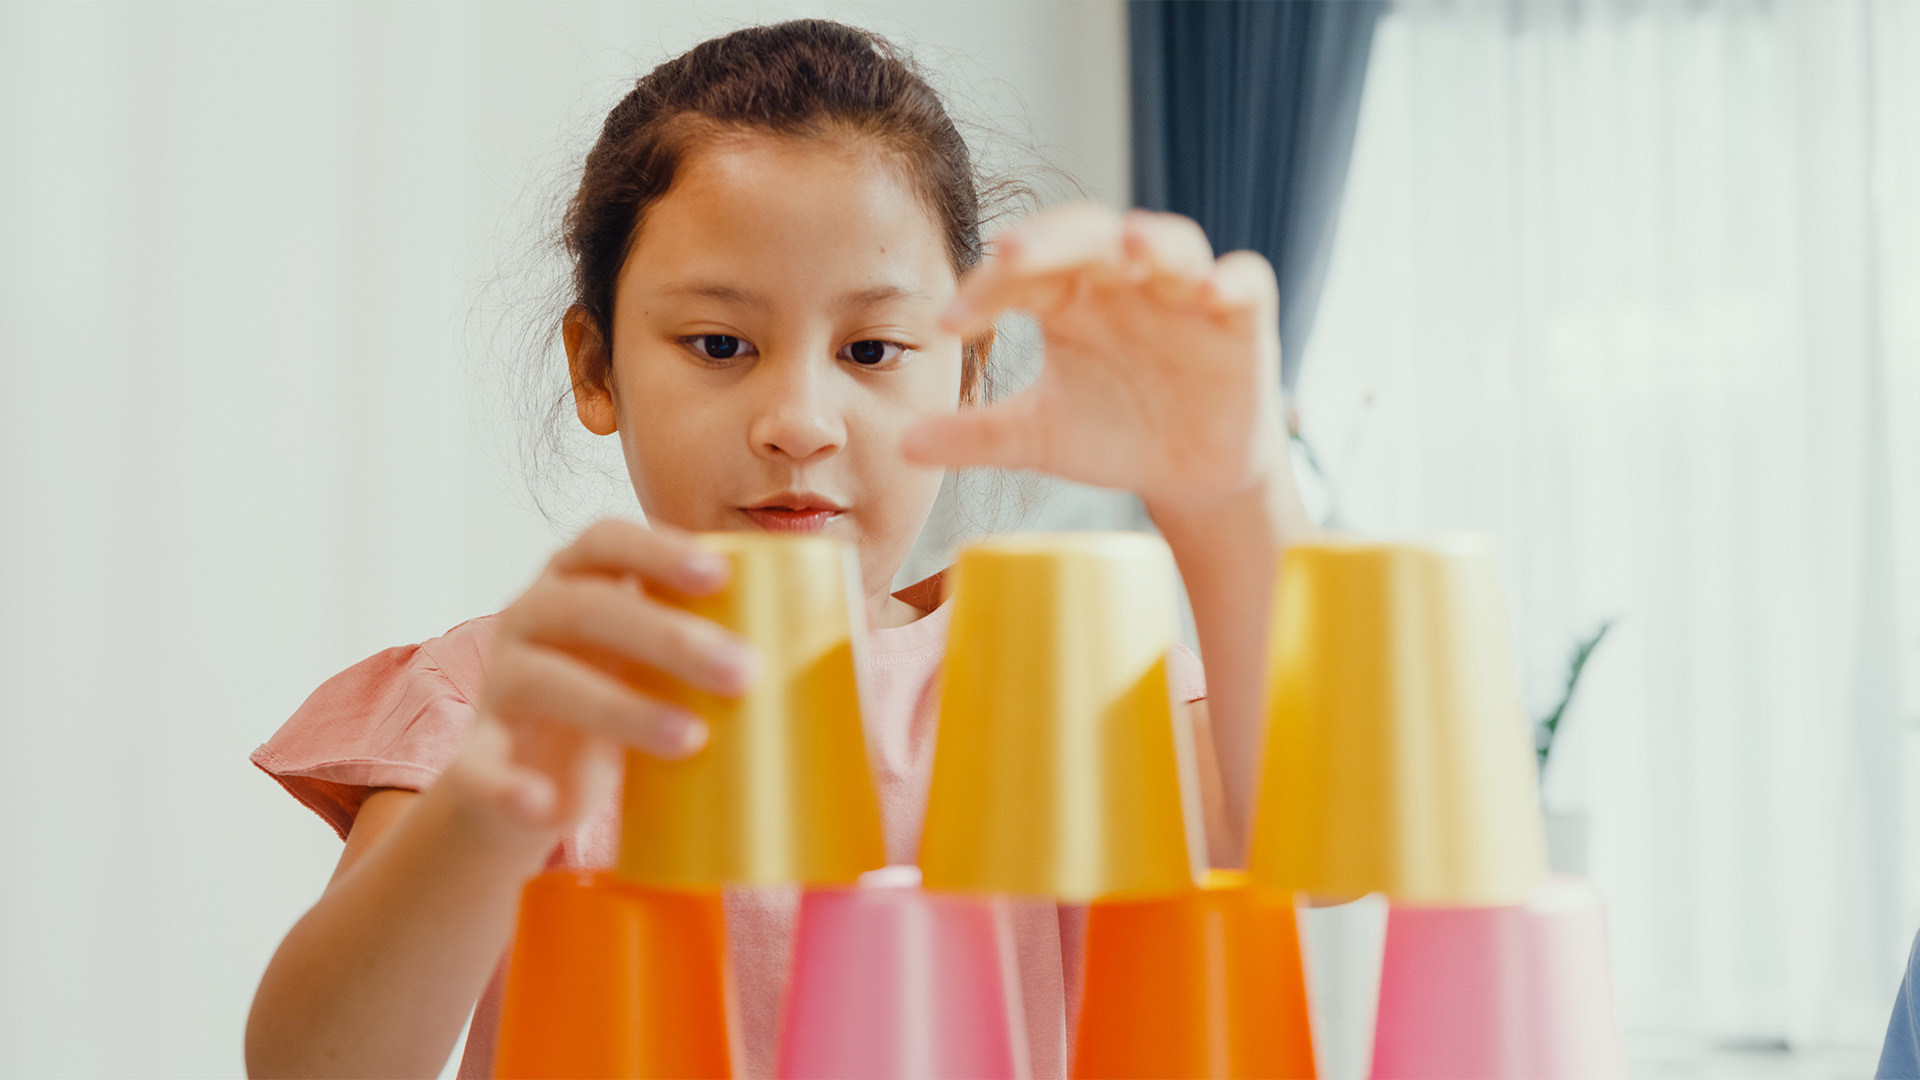 Cup Stacking Challenges